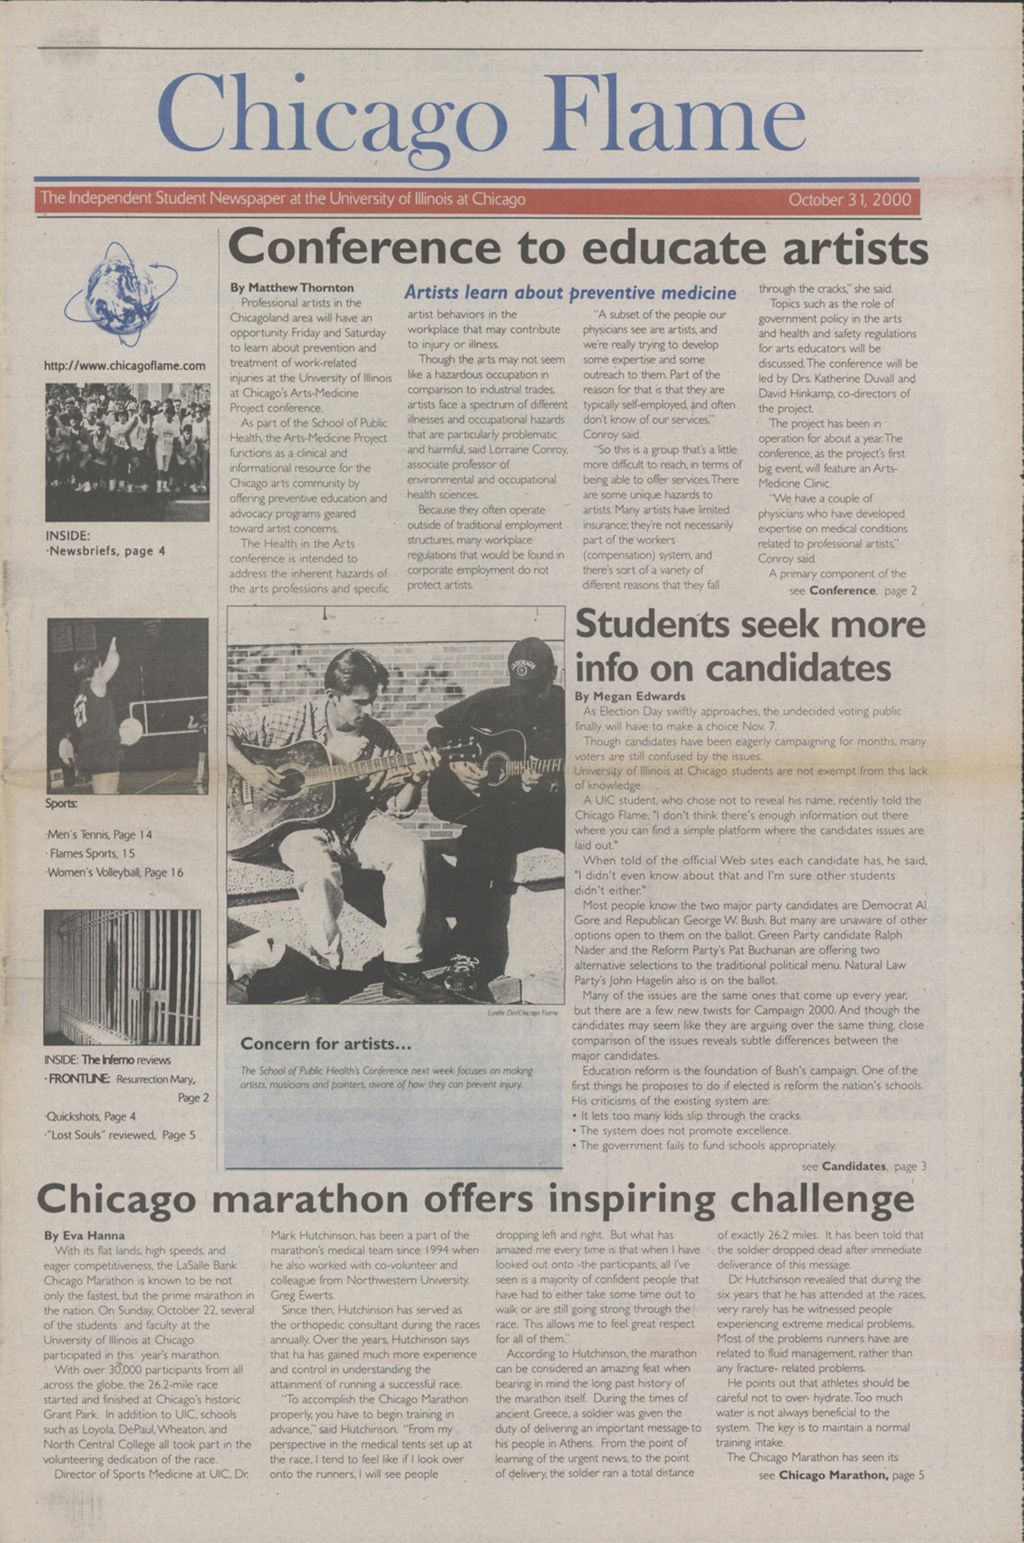 Chicago Flame (October 31, 2000)